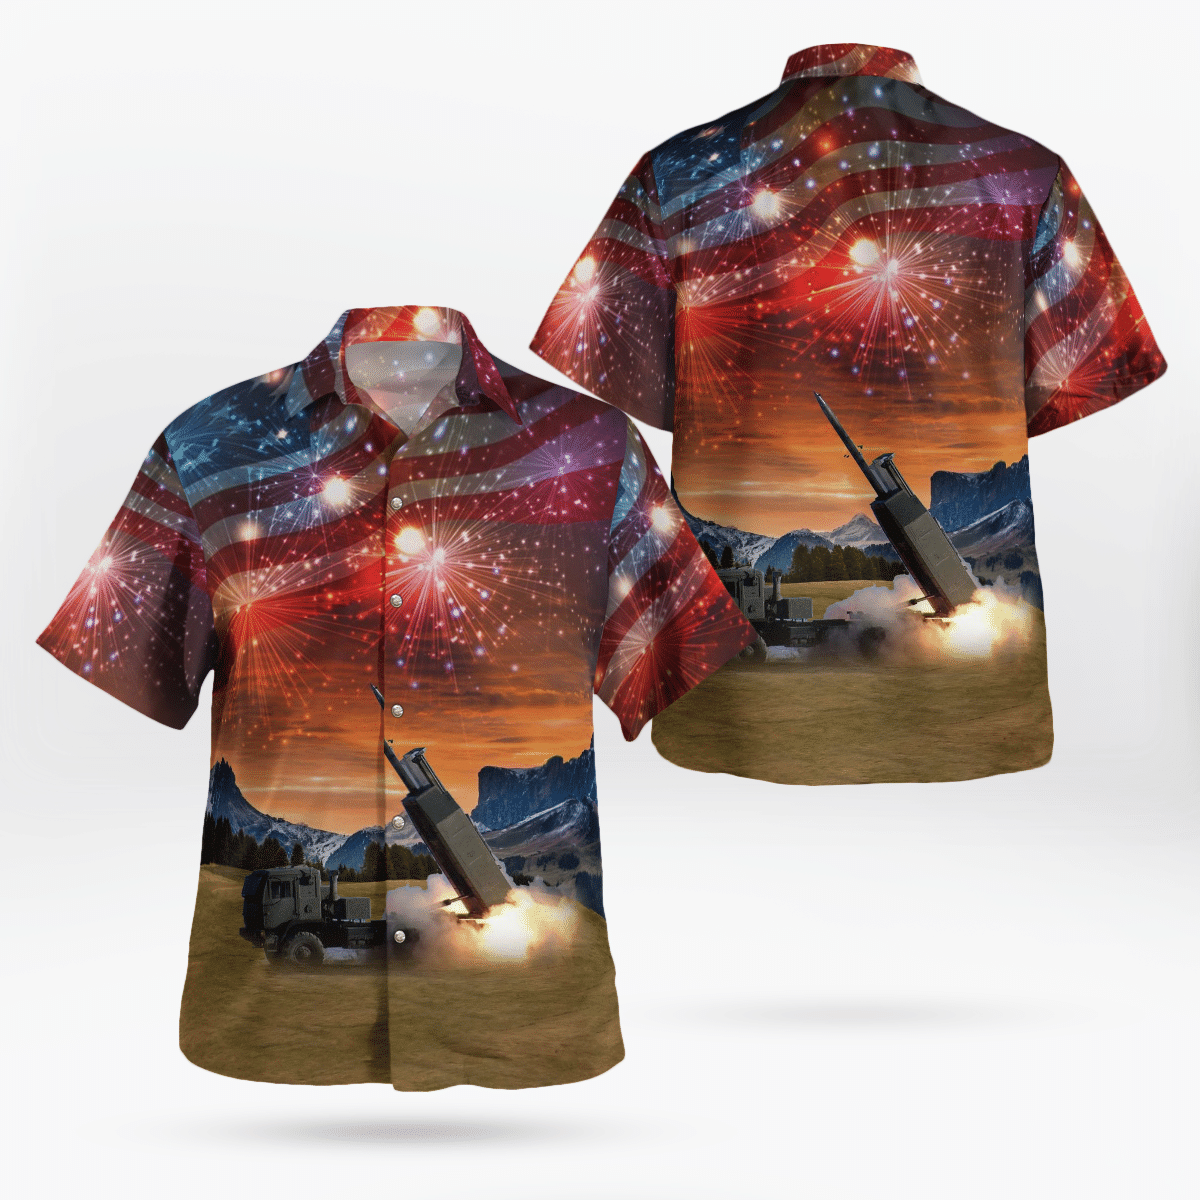 Shop now to find the perfect Hawaii Shirt for your hobby 146